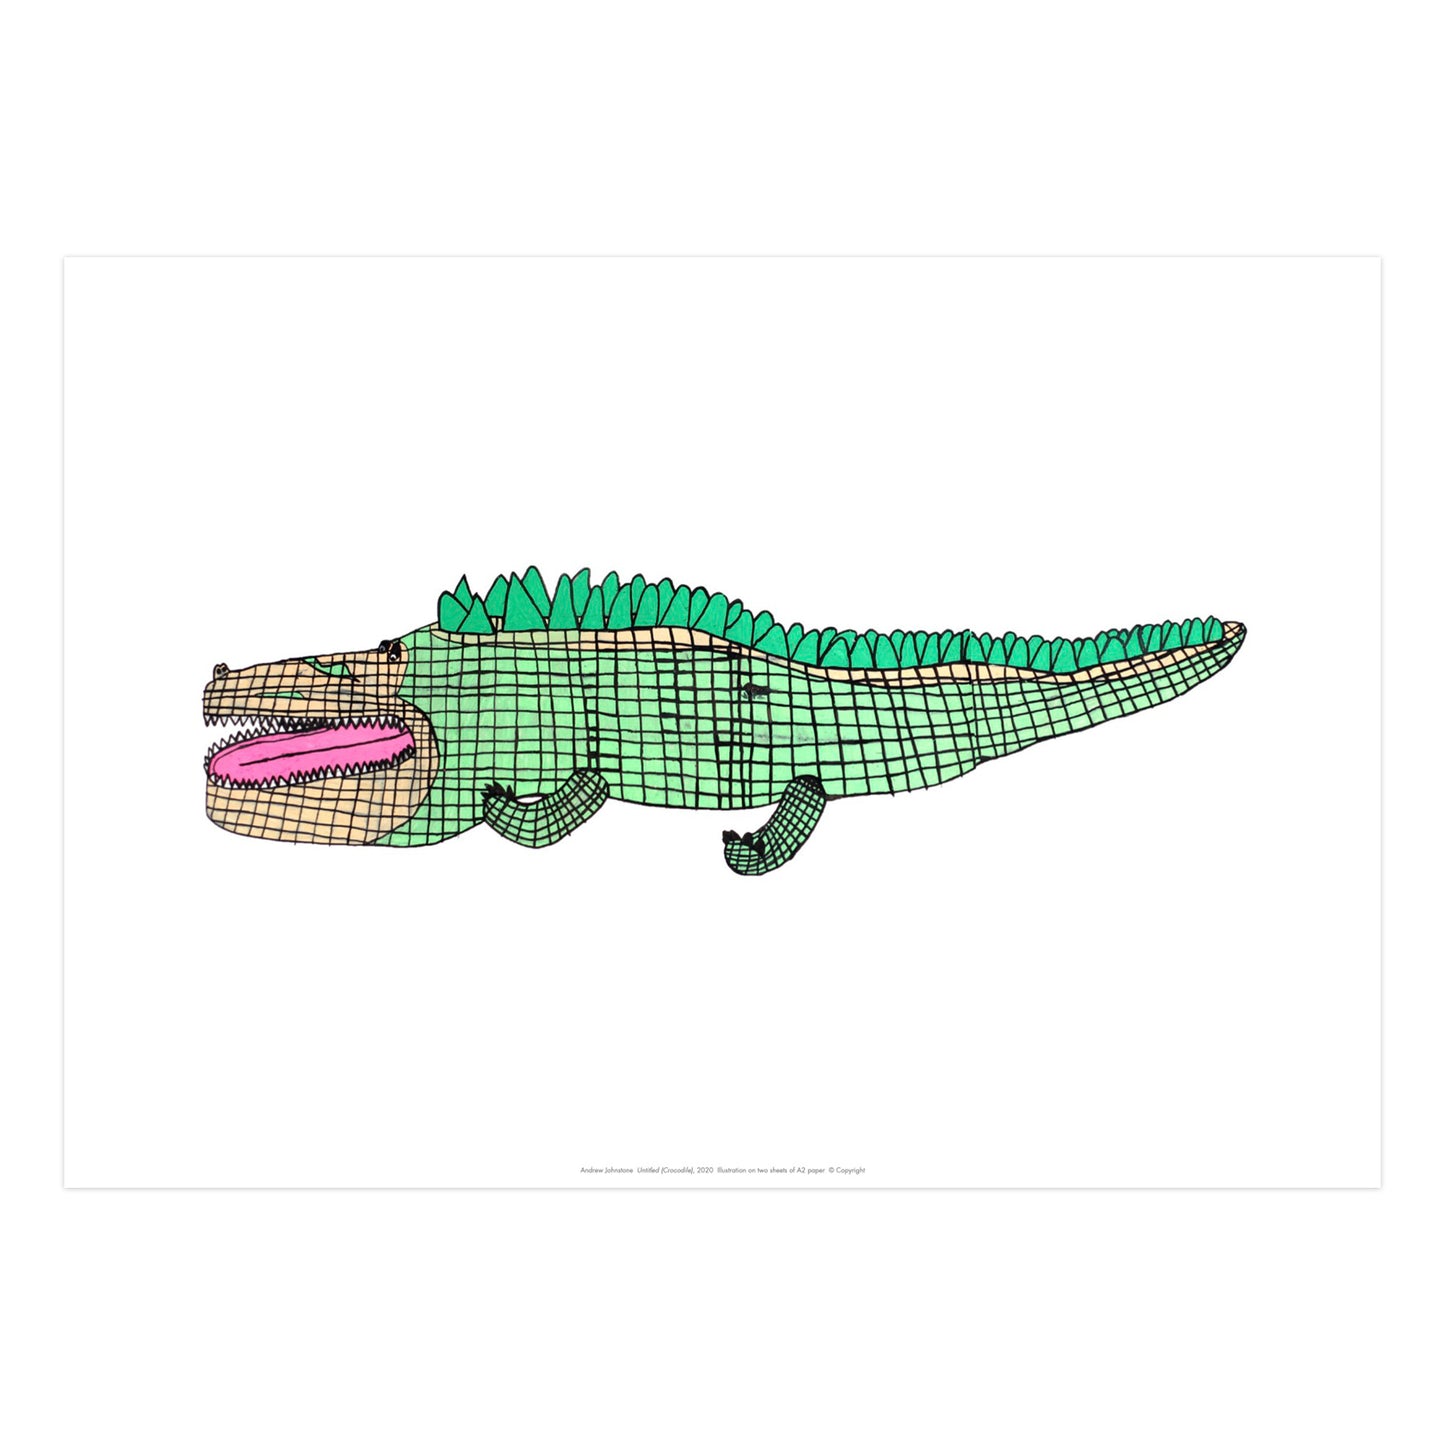 Load image into Gallery viewer, Reproduction of Andrew Johnston limited edition crocodile artwork
